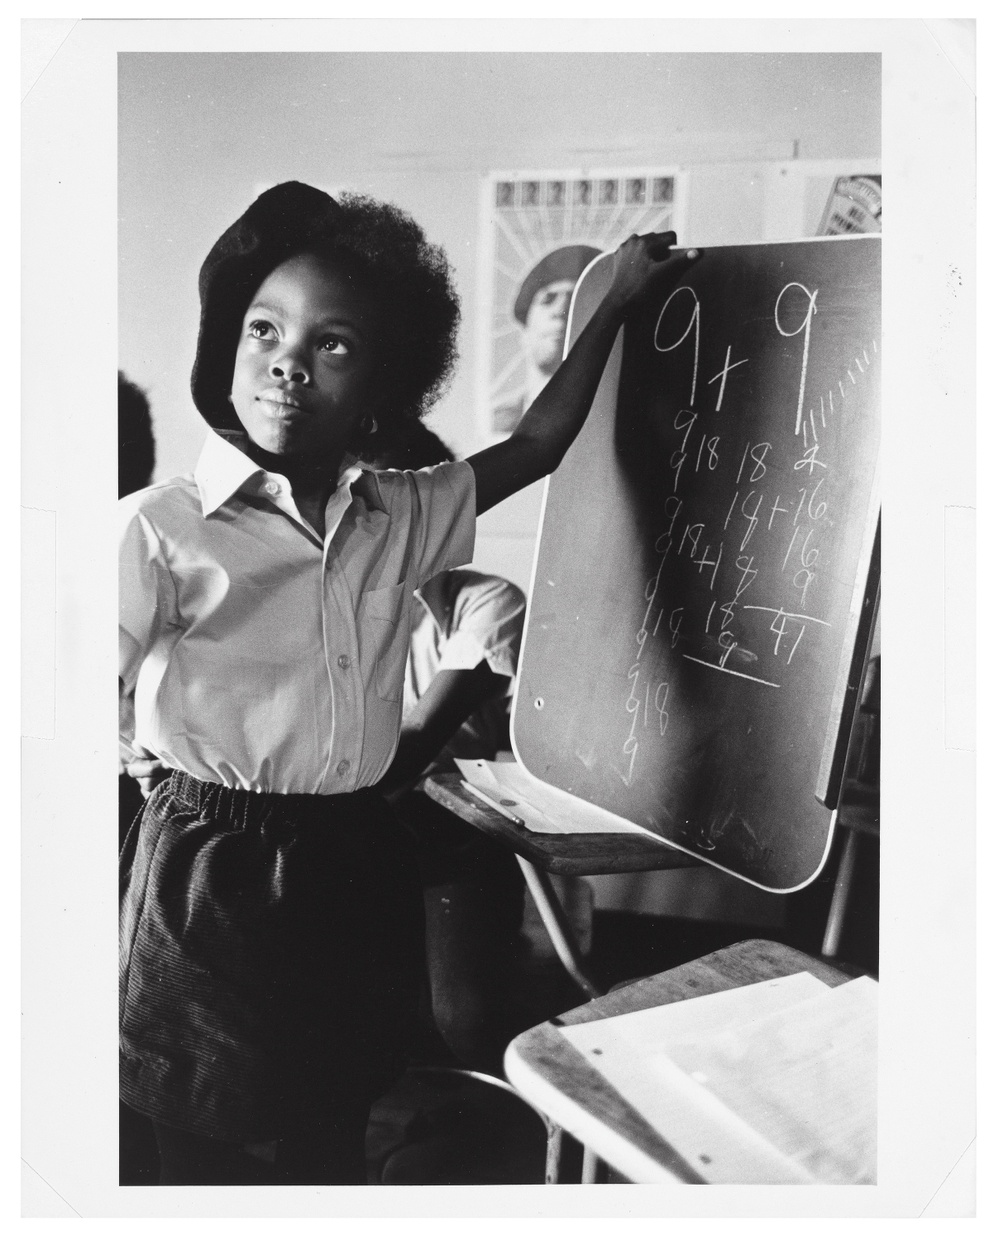 A black and white photograph of a little, Black girl wearing a school uniform and a beret holding up a small chalkboard with math equations written on it.